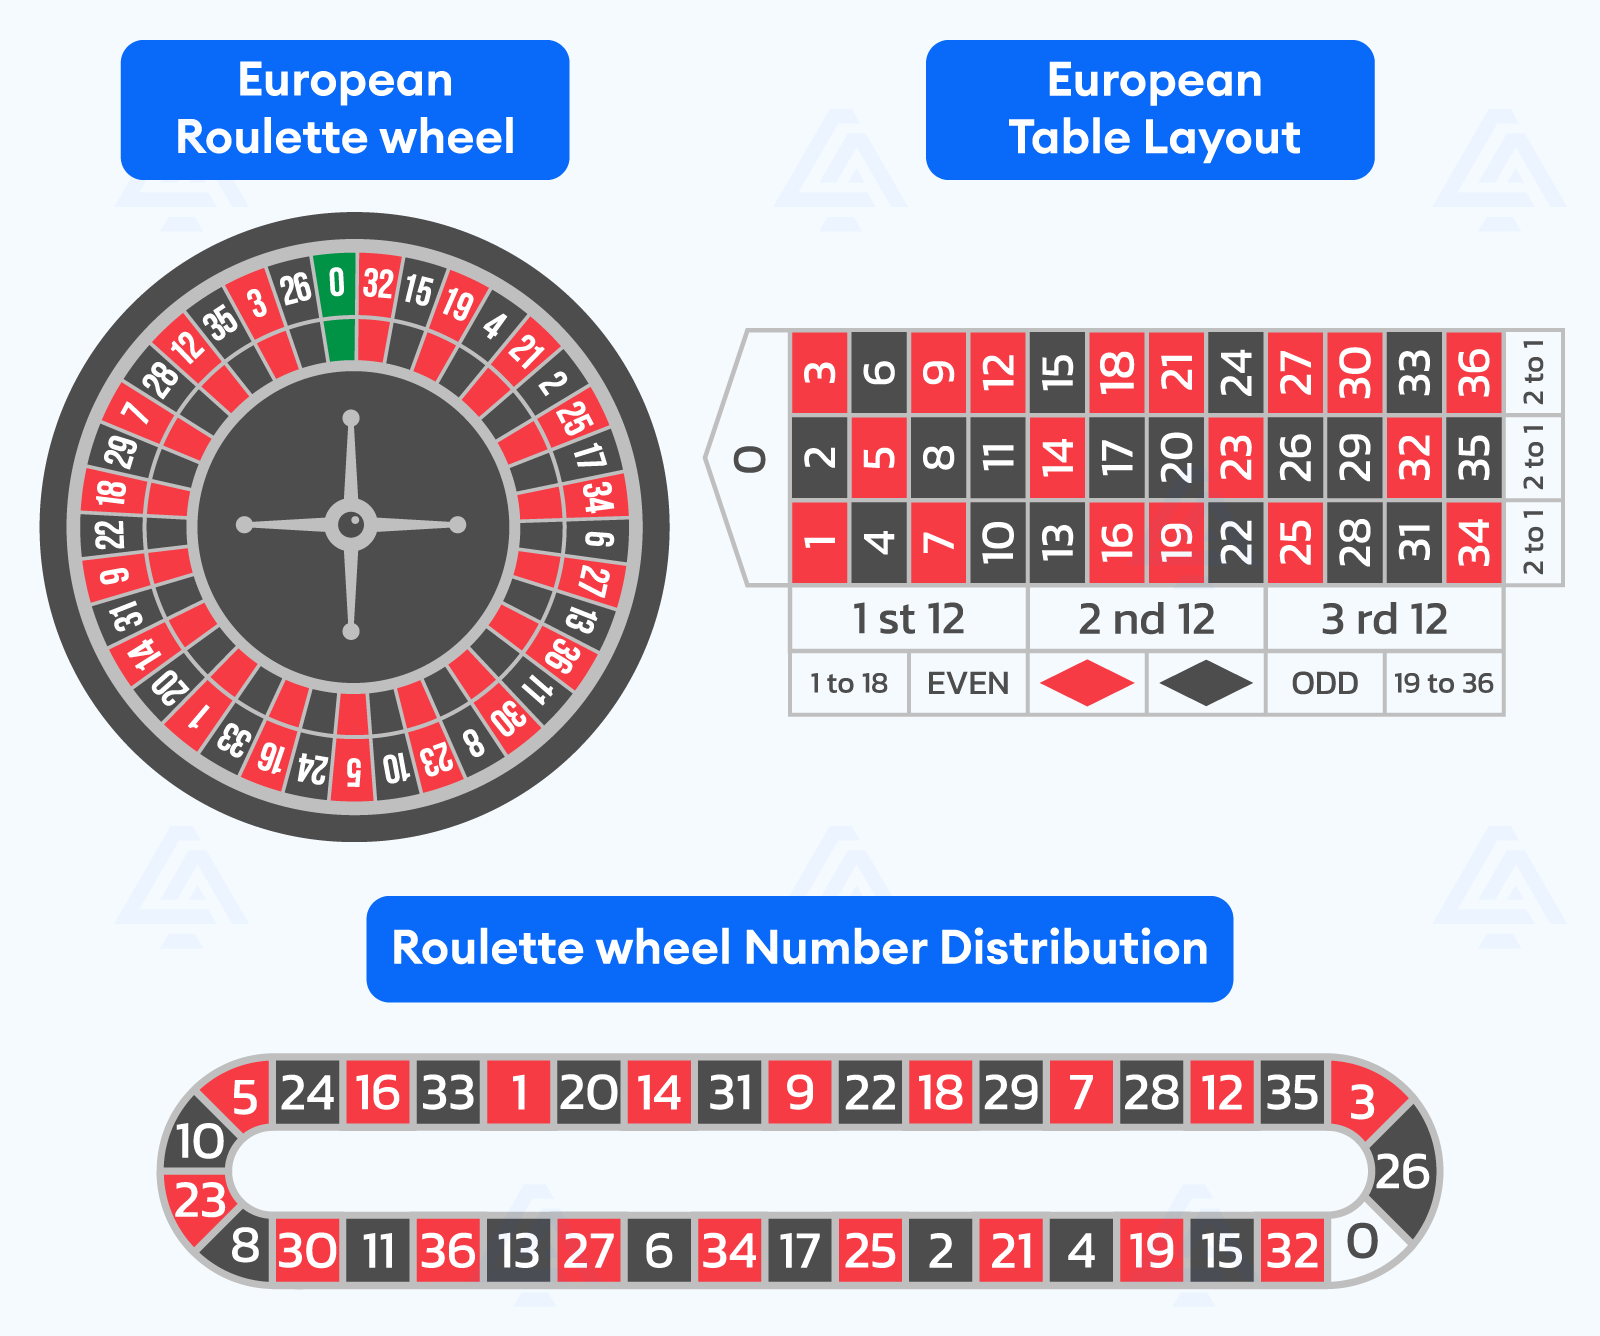 European roulette wheel - table layout - number distribution